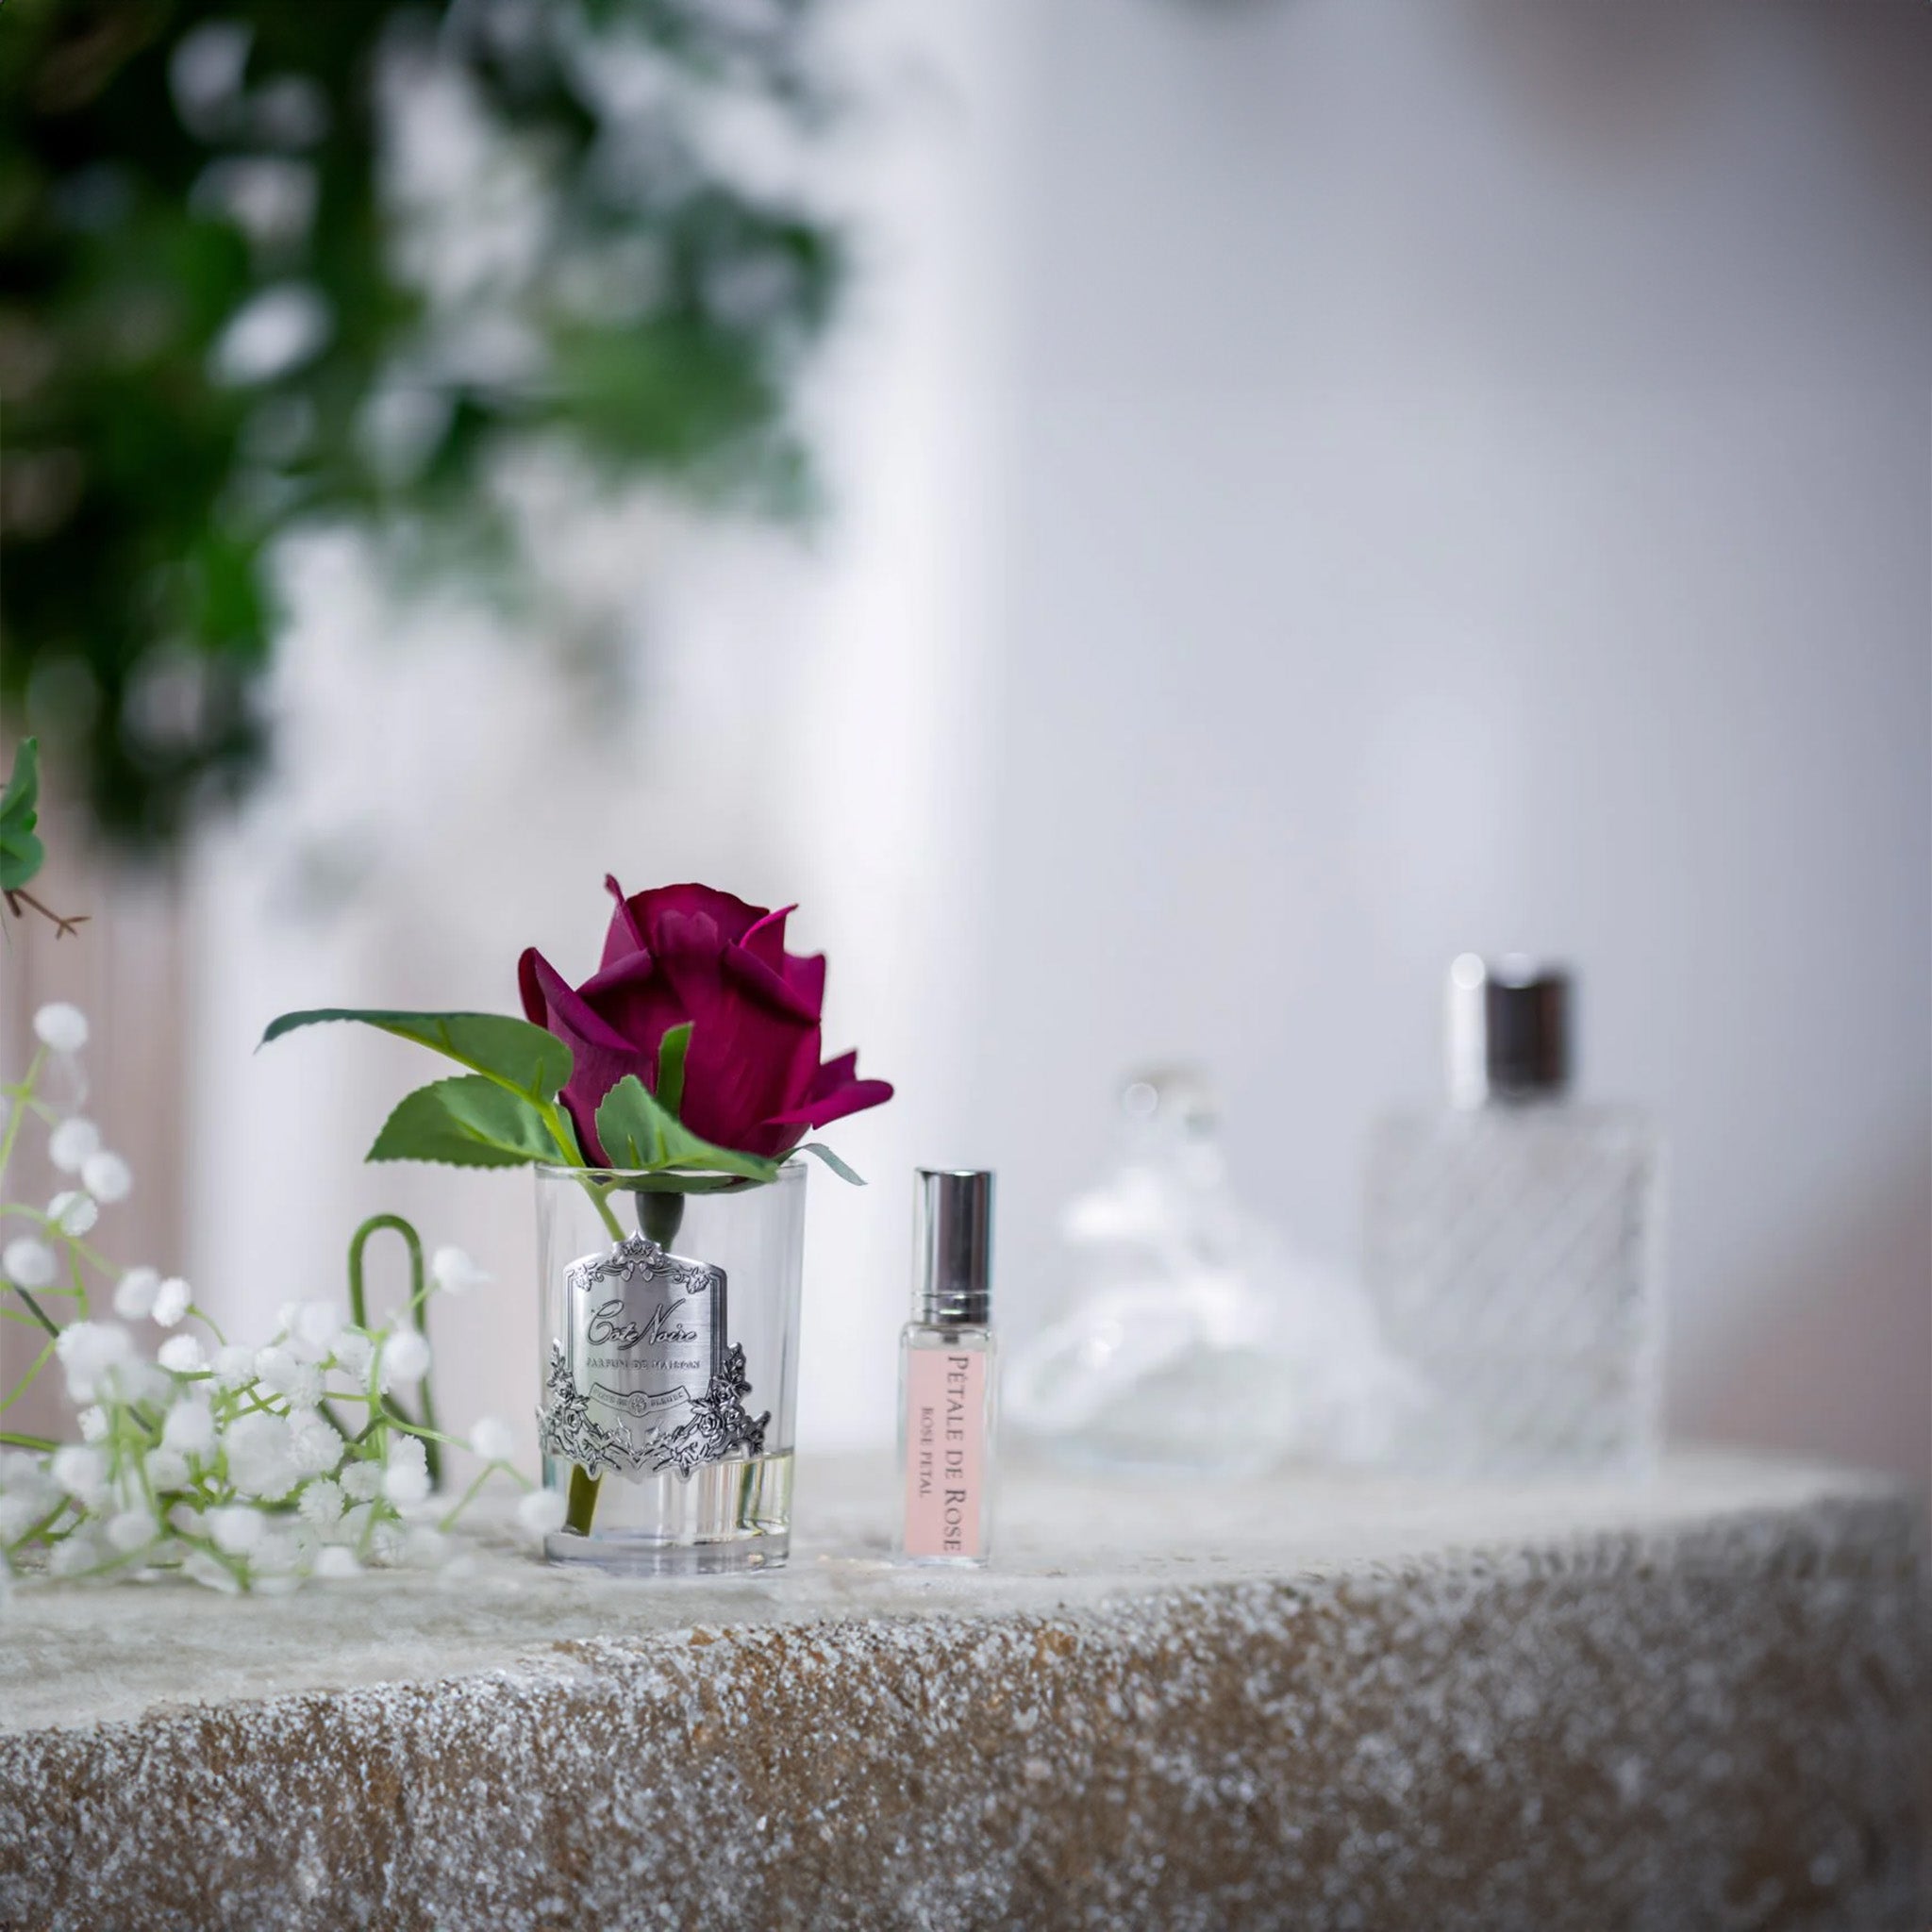 a red rose in a vase by cote noire next to a box of fragrance on a stone able